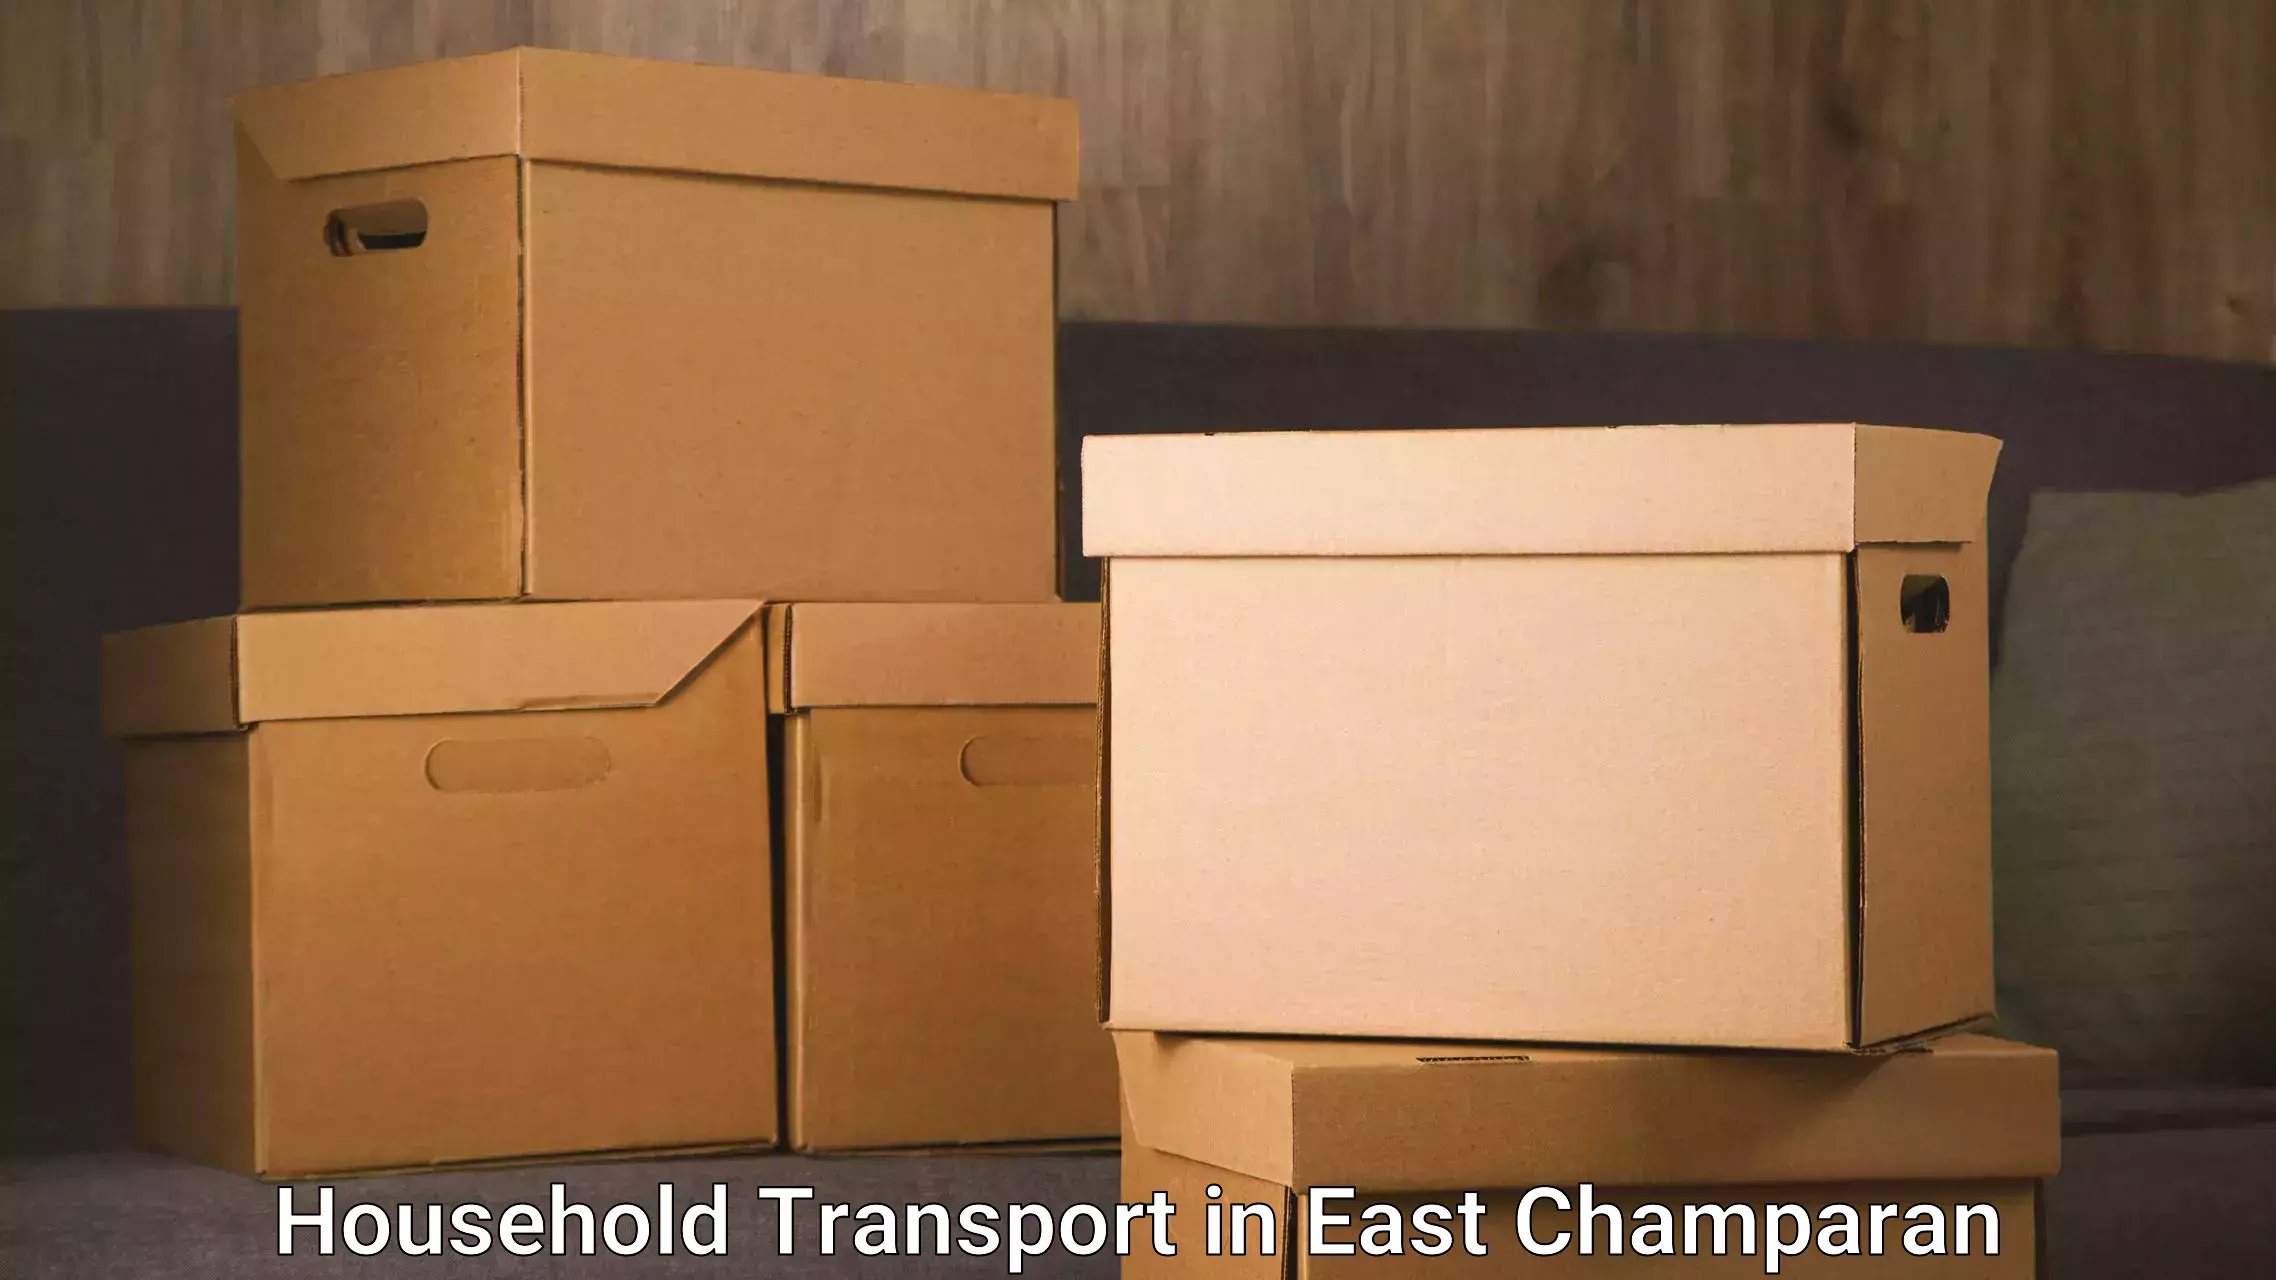 Furniture transport and logistics in East Champaran